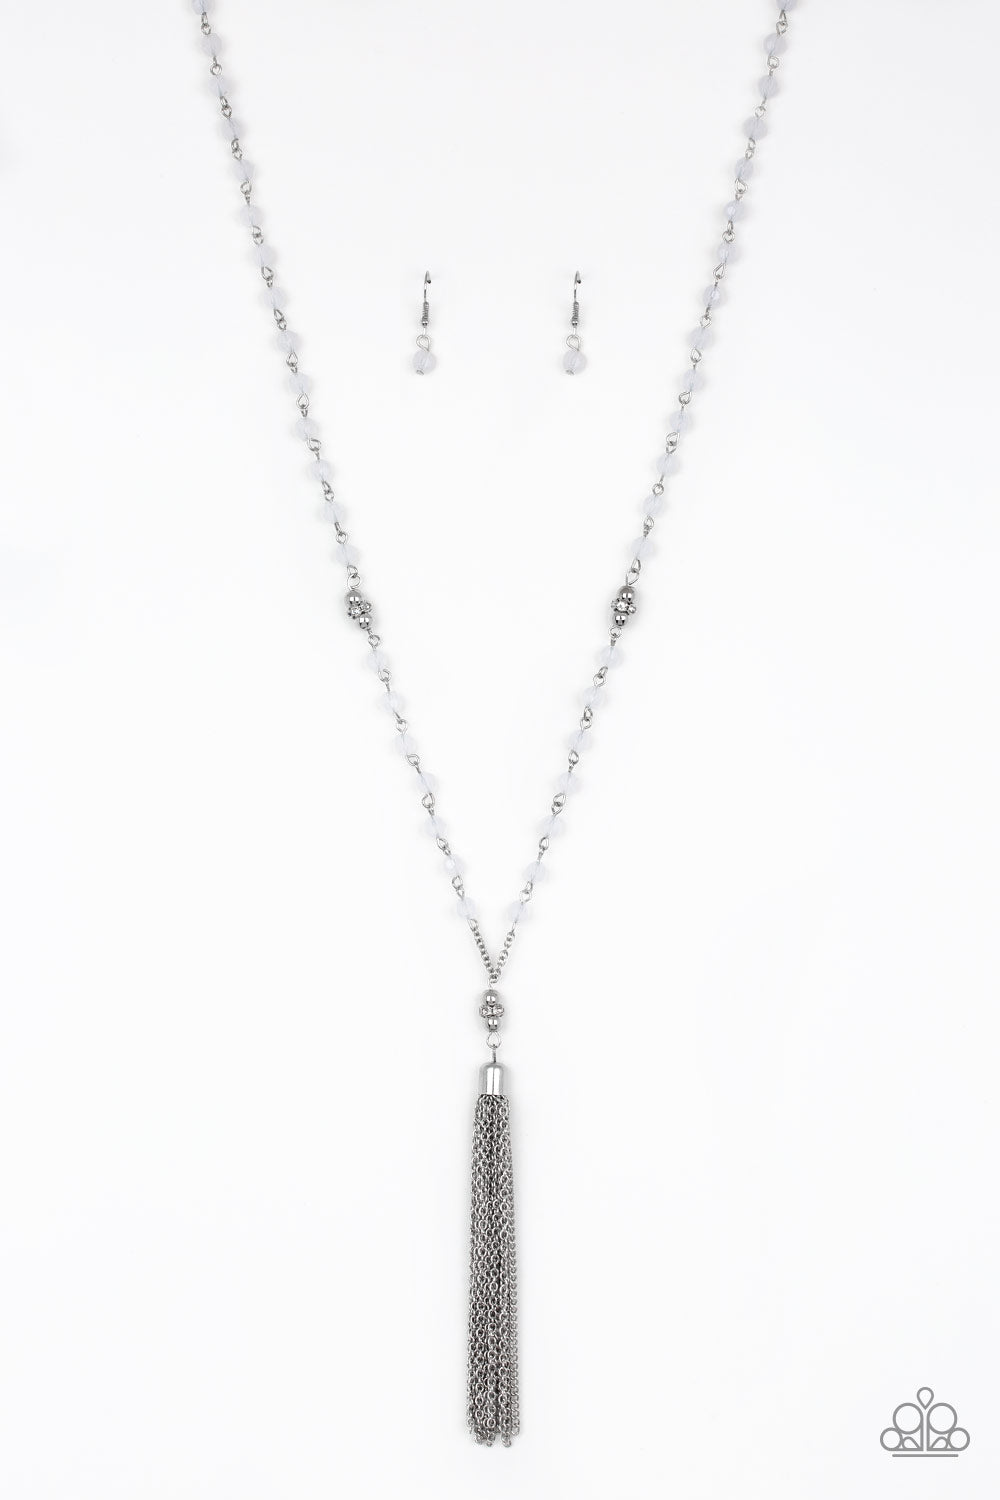 Paparazzi Accessories - Tassel Takeover  #N544- White Necklace